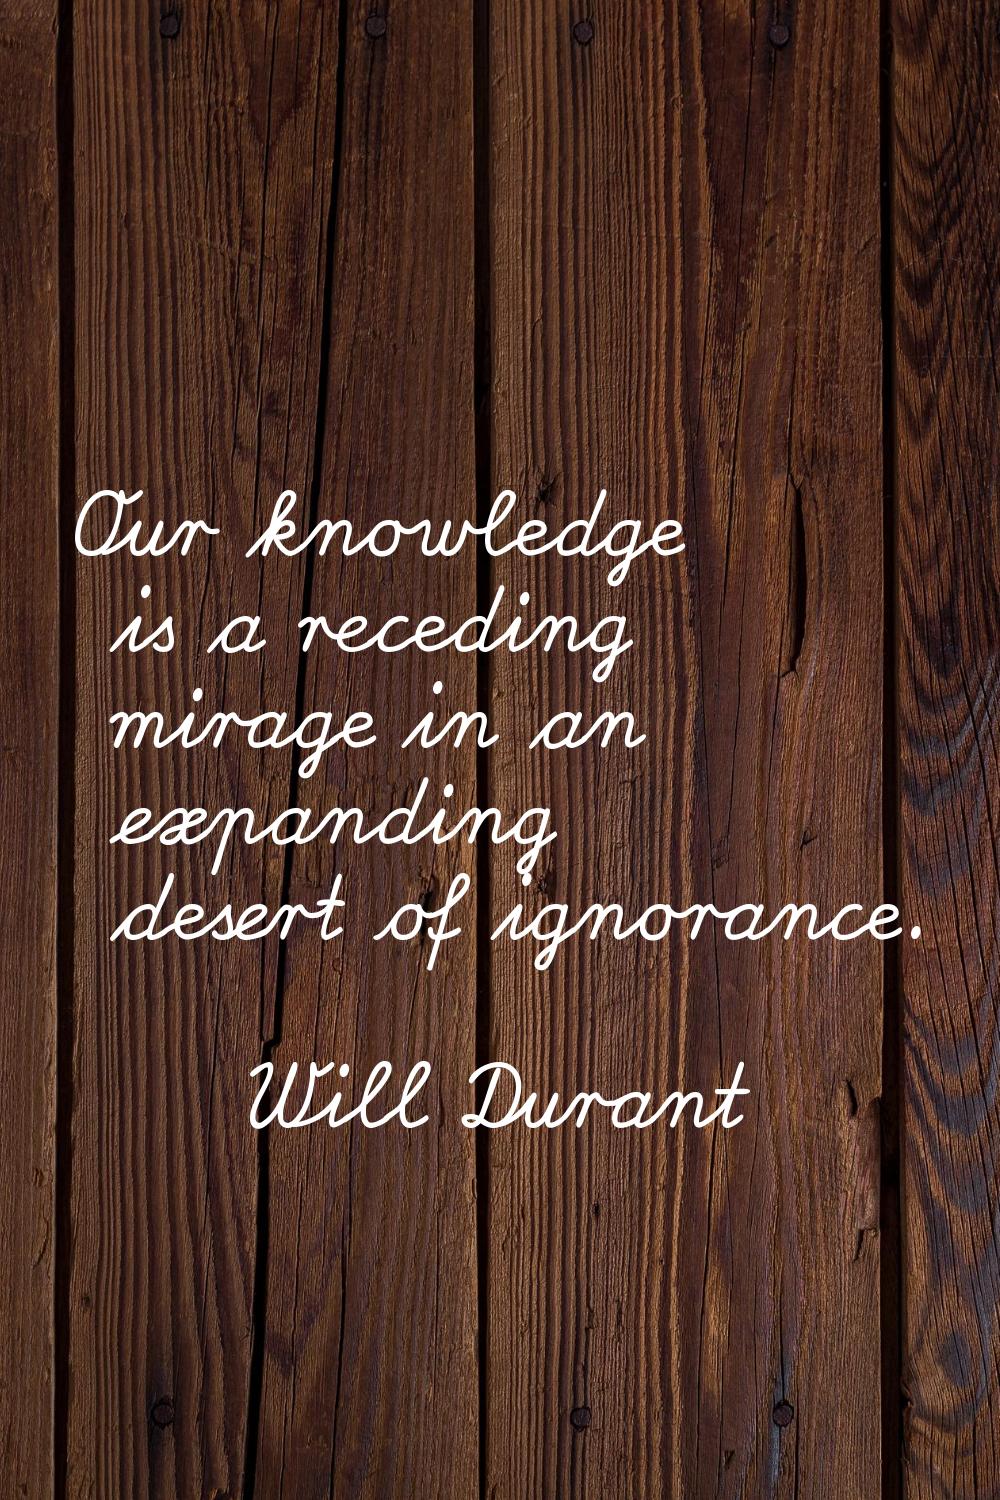 Our knowledge is a receding mirage in an expanding desert of ignorance.